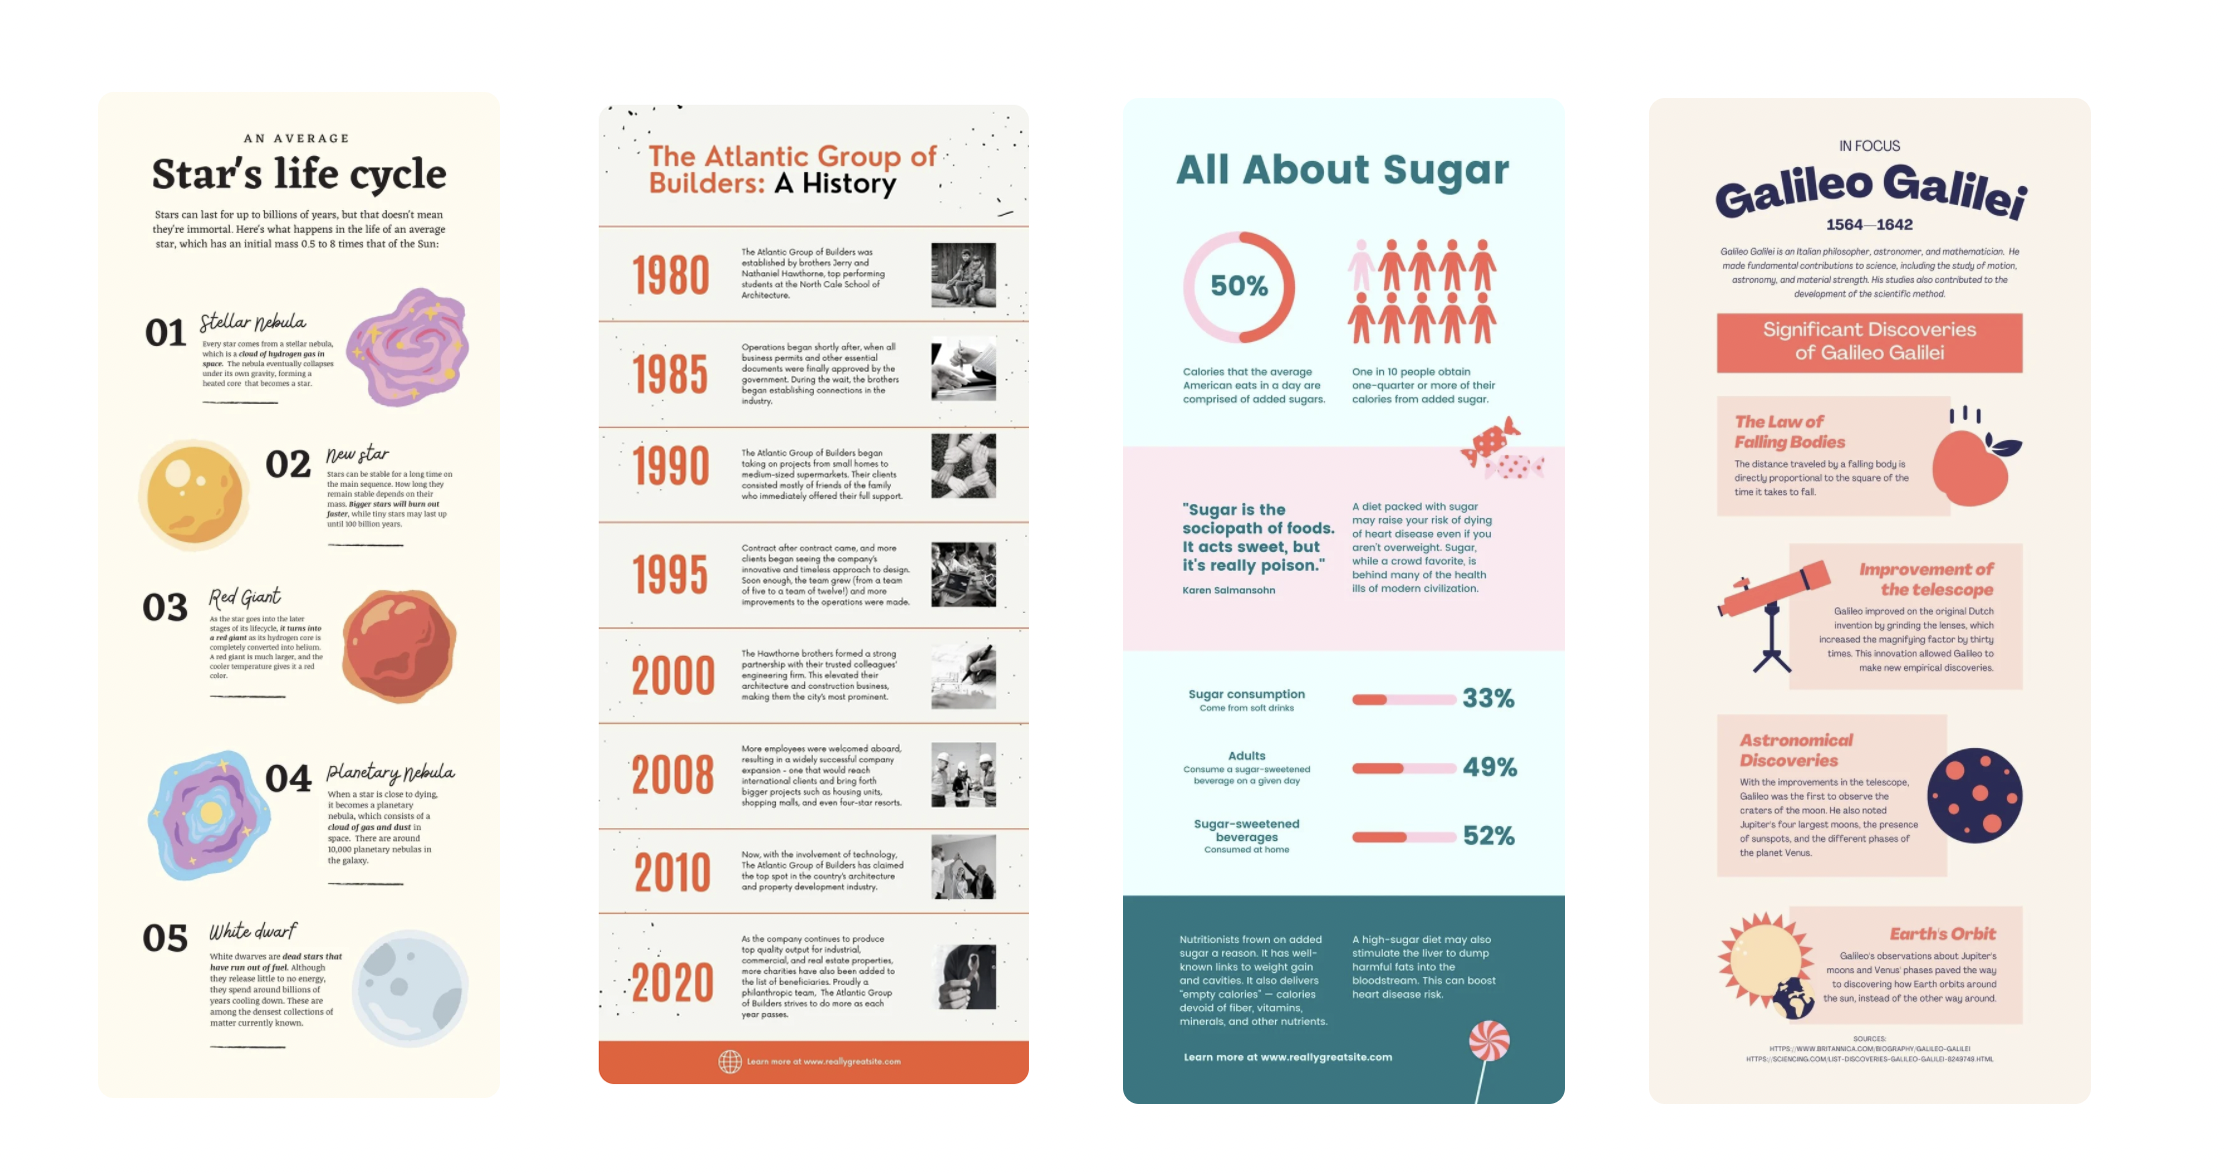 popular infographic examples